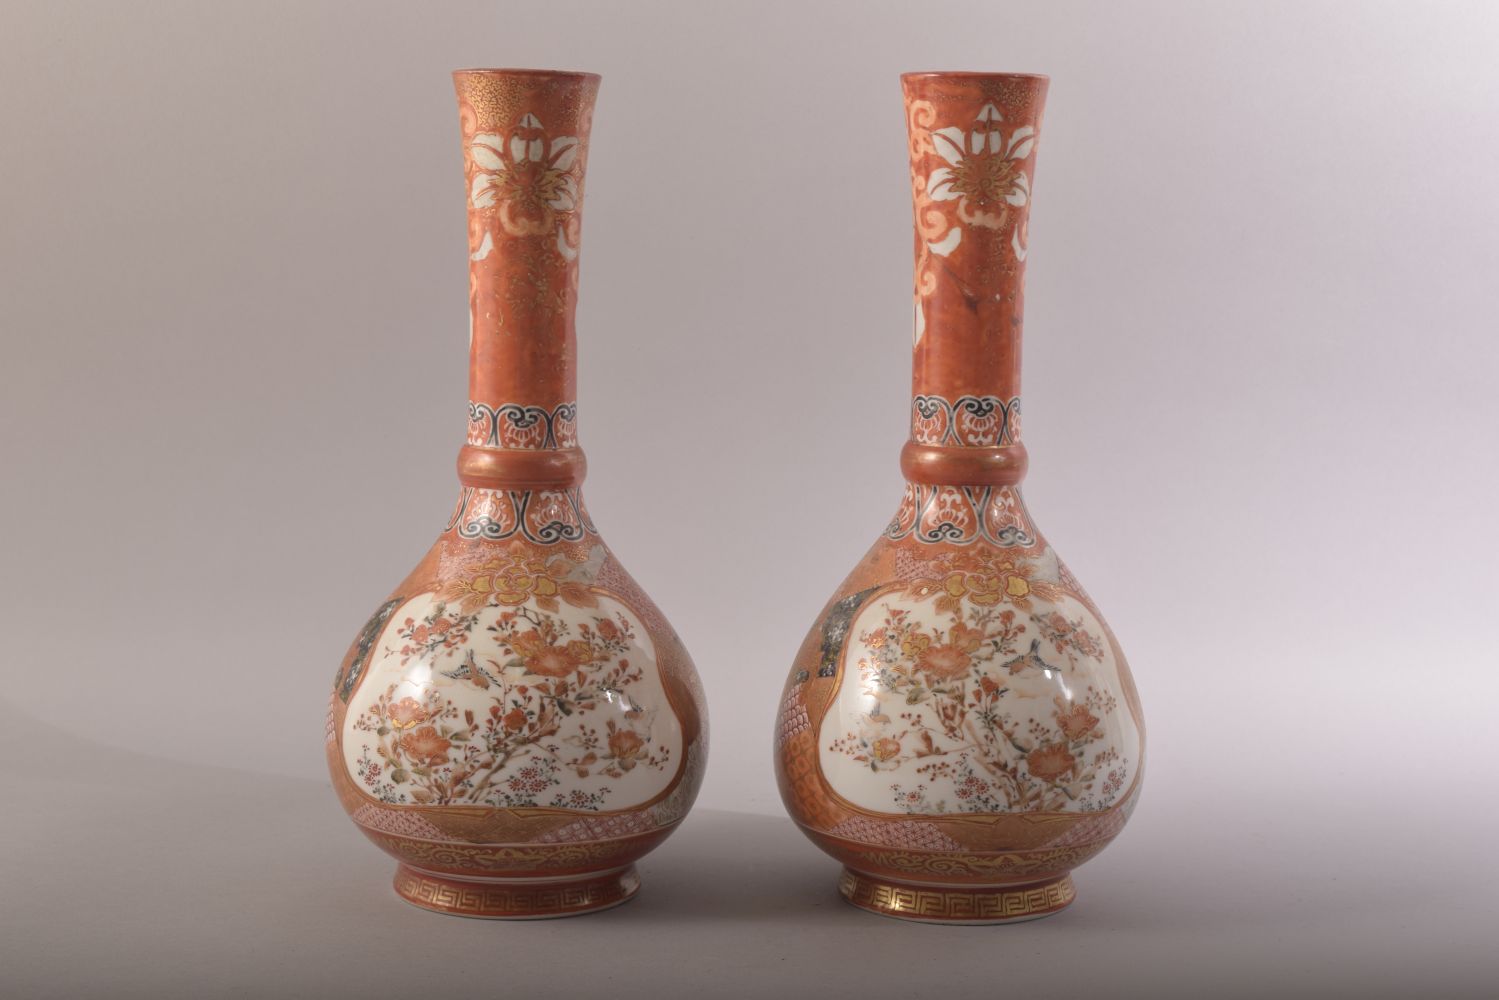 A PAIR OF JAPANESE KUTANI PORCELAIN VASES, each painted with a panel depicting two figures at a - Image 3 of 8